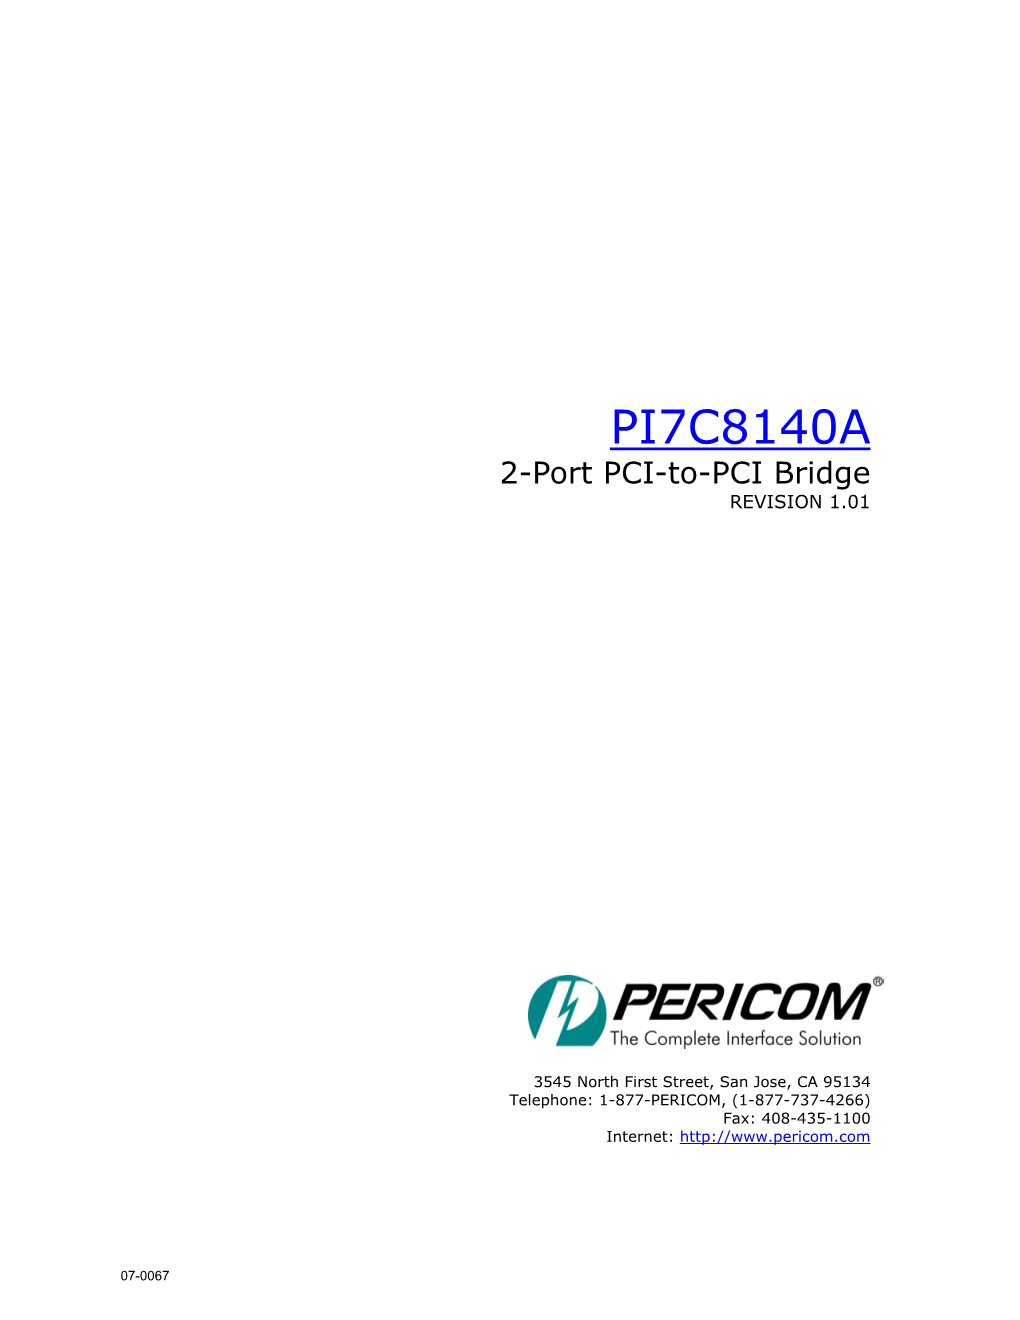 PI7C8140A Datasheet Will Be Enhanced Periodically When Updated Information Is Available